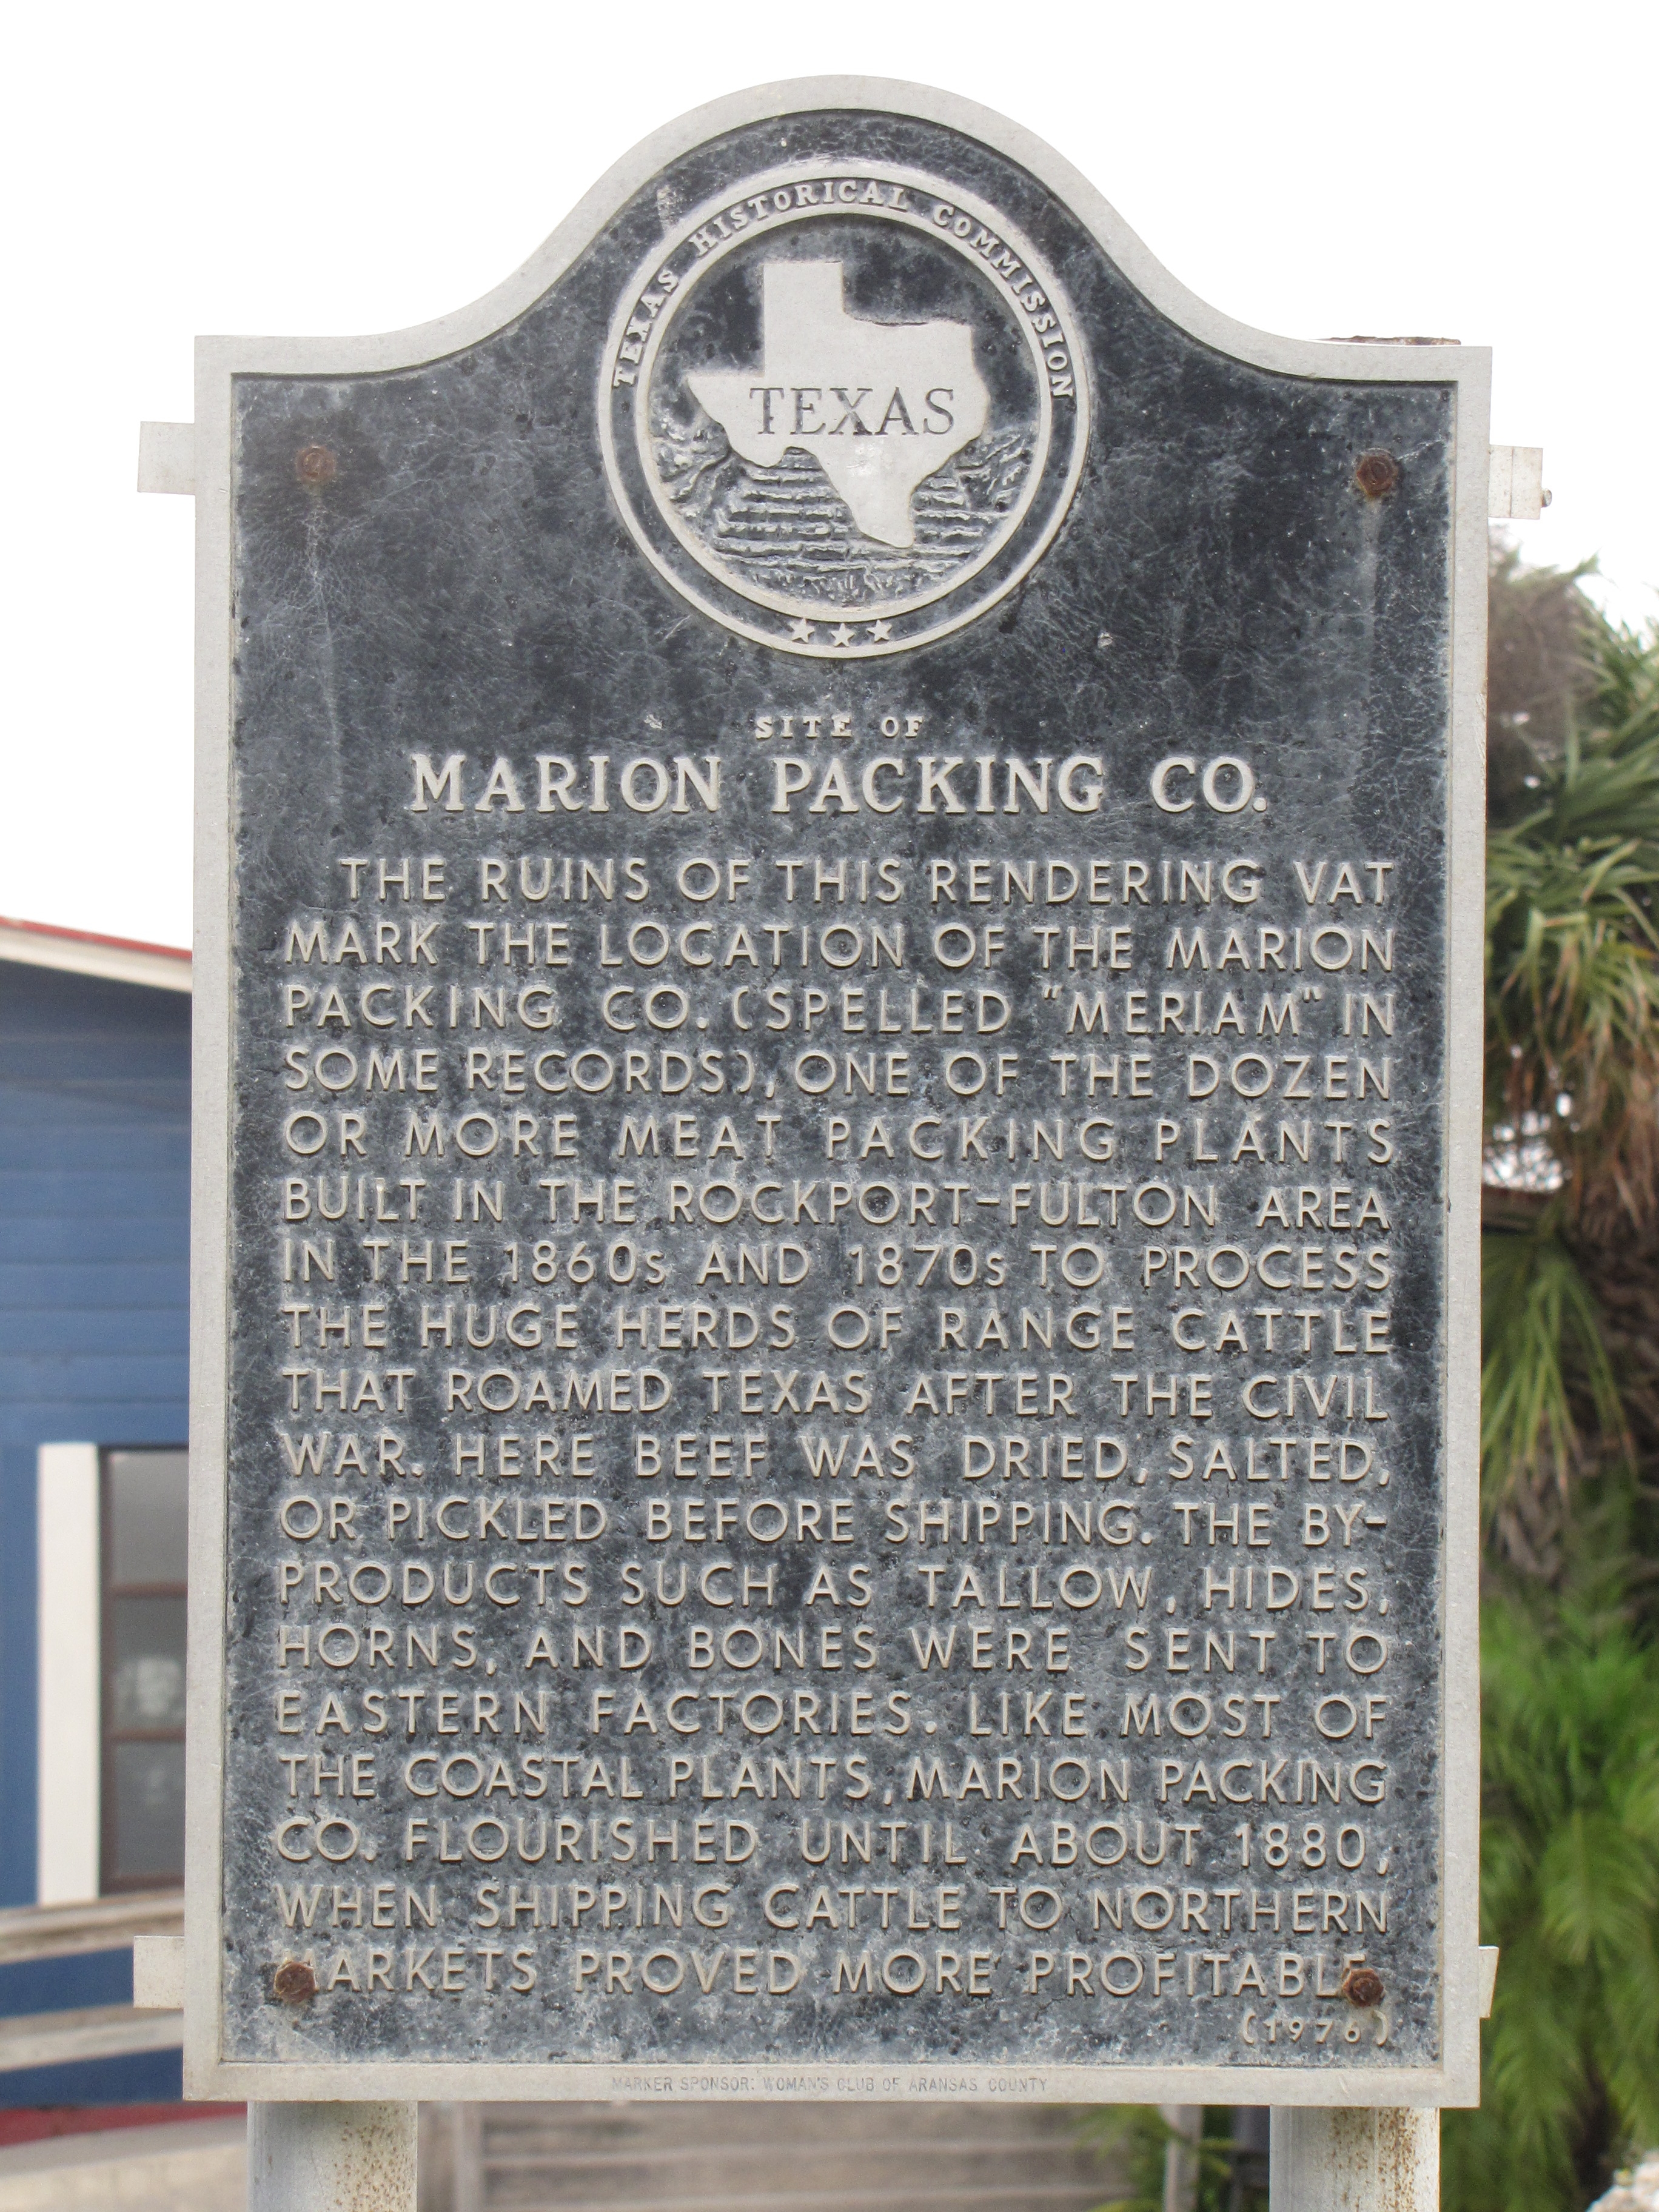 Site of Marion Packing Co. Marker